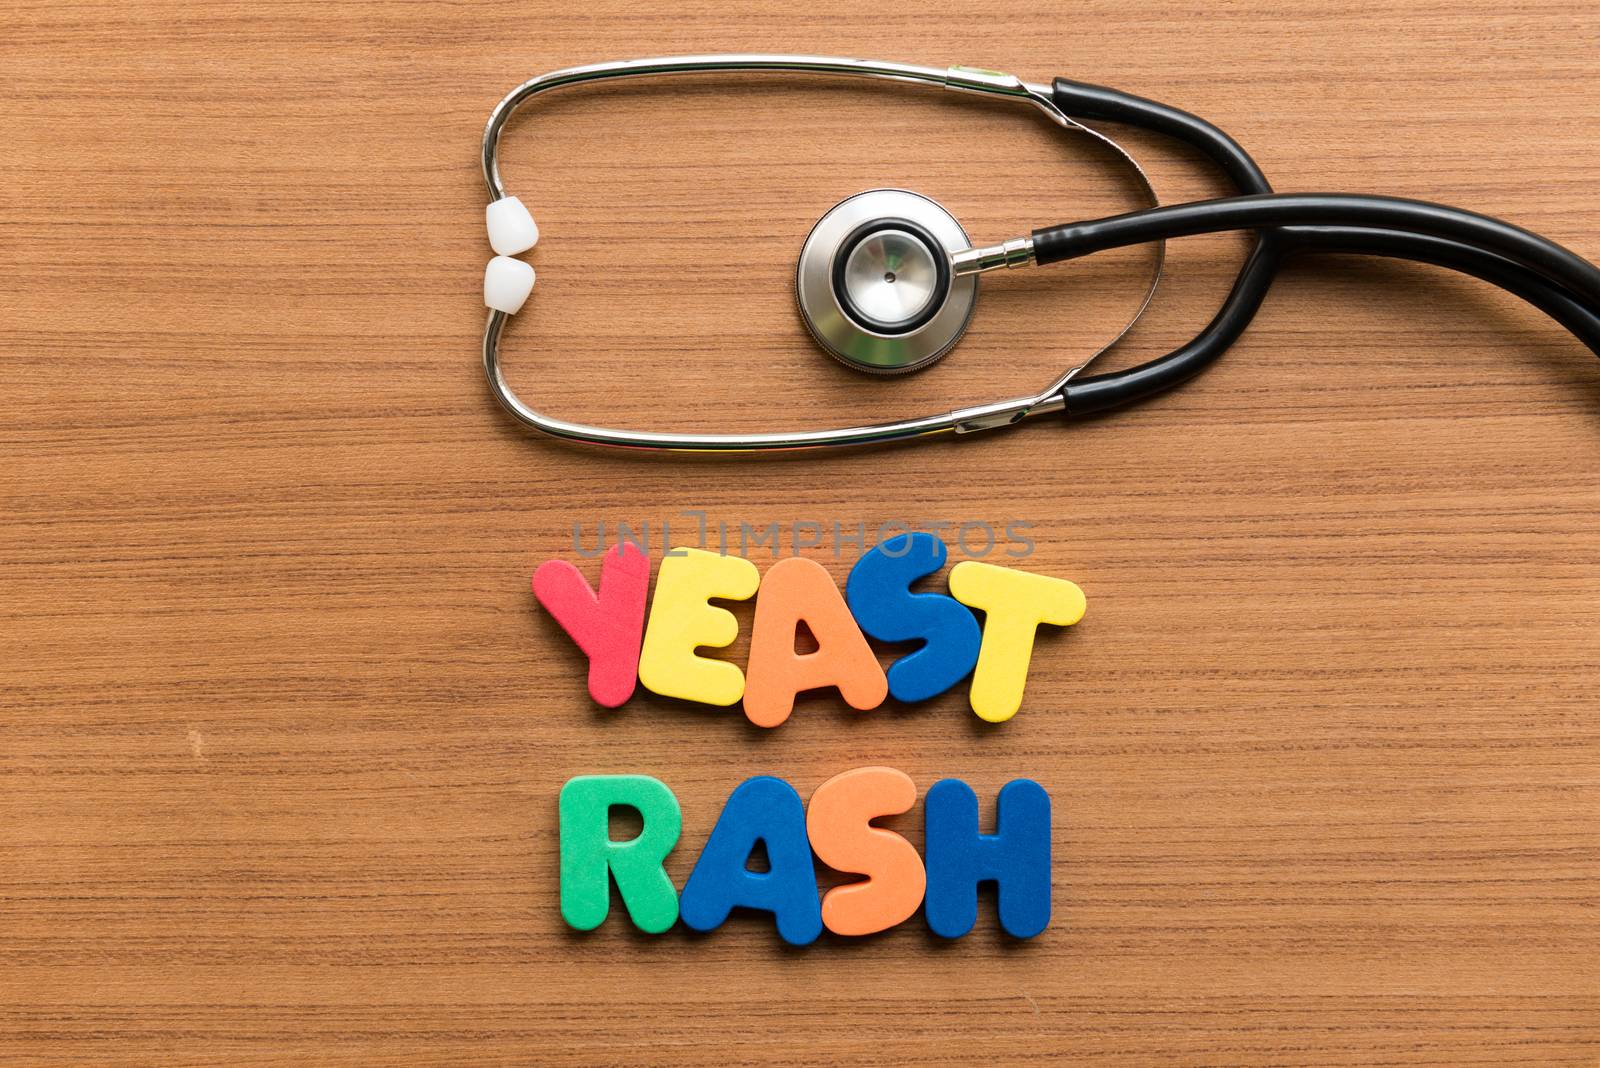 yeast rash colorful word with stethoscope by sohel.parvez@hotmail.com